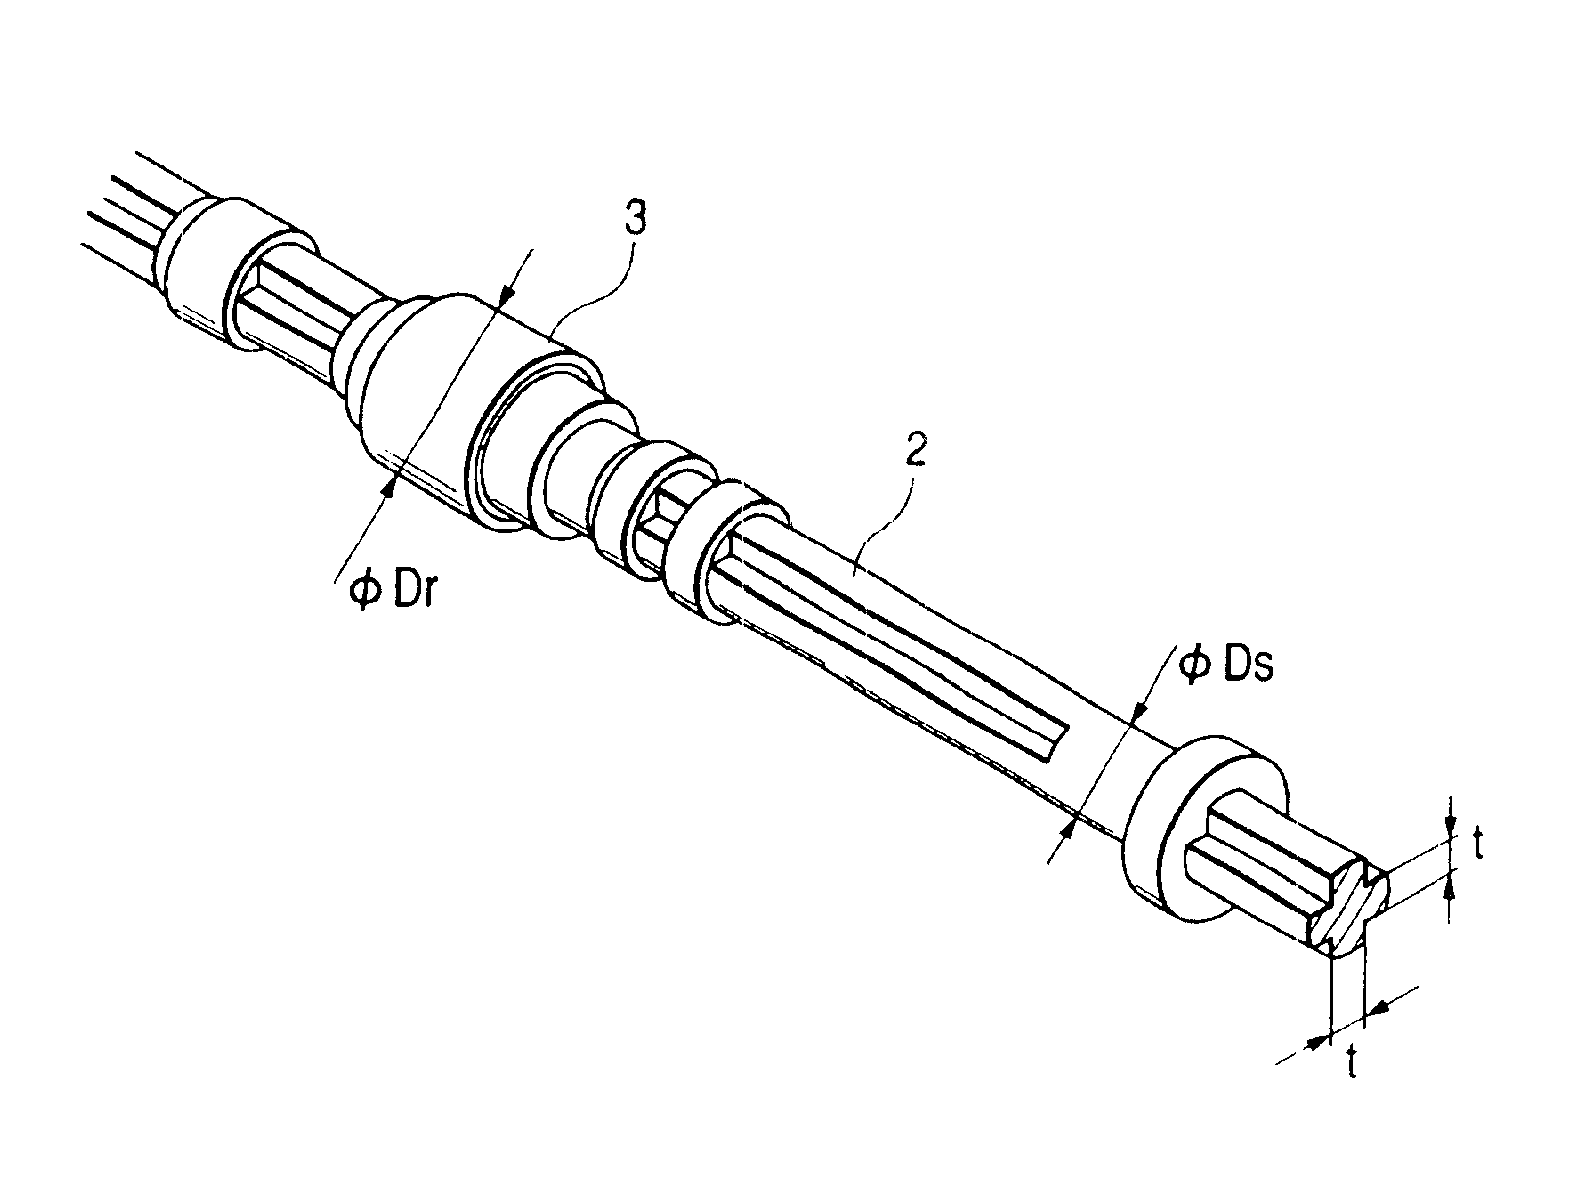 Discharging roller, method of manufacturing the same, and recording apparatus incorporating the same